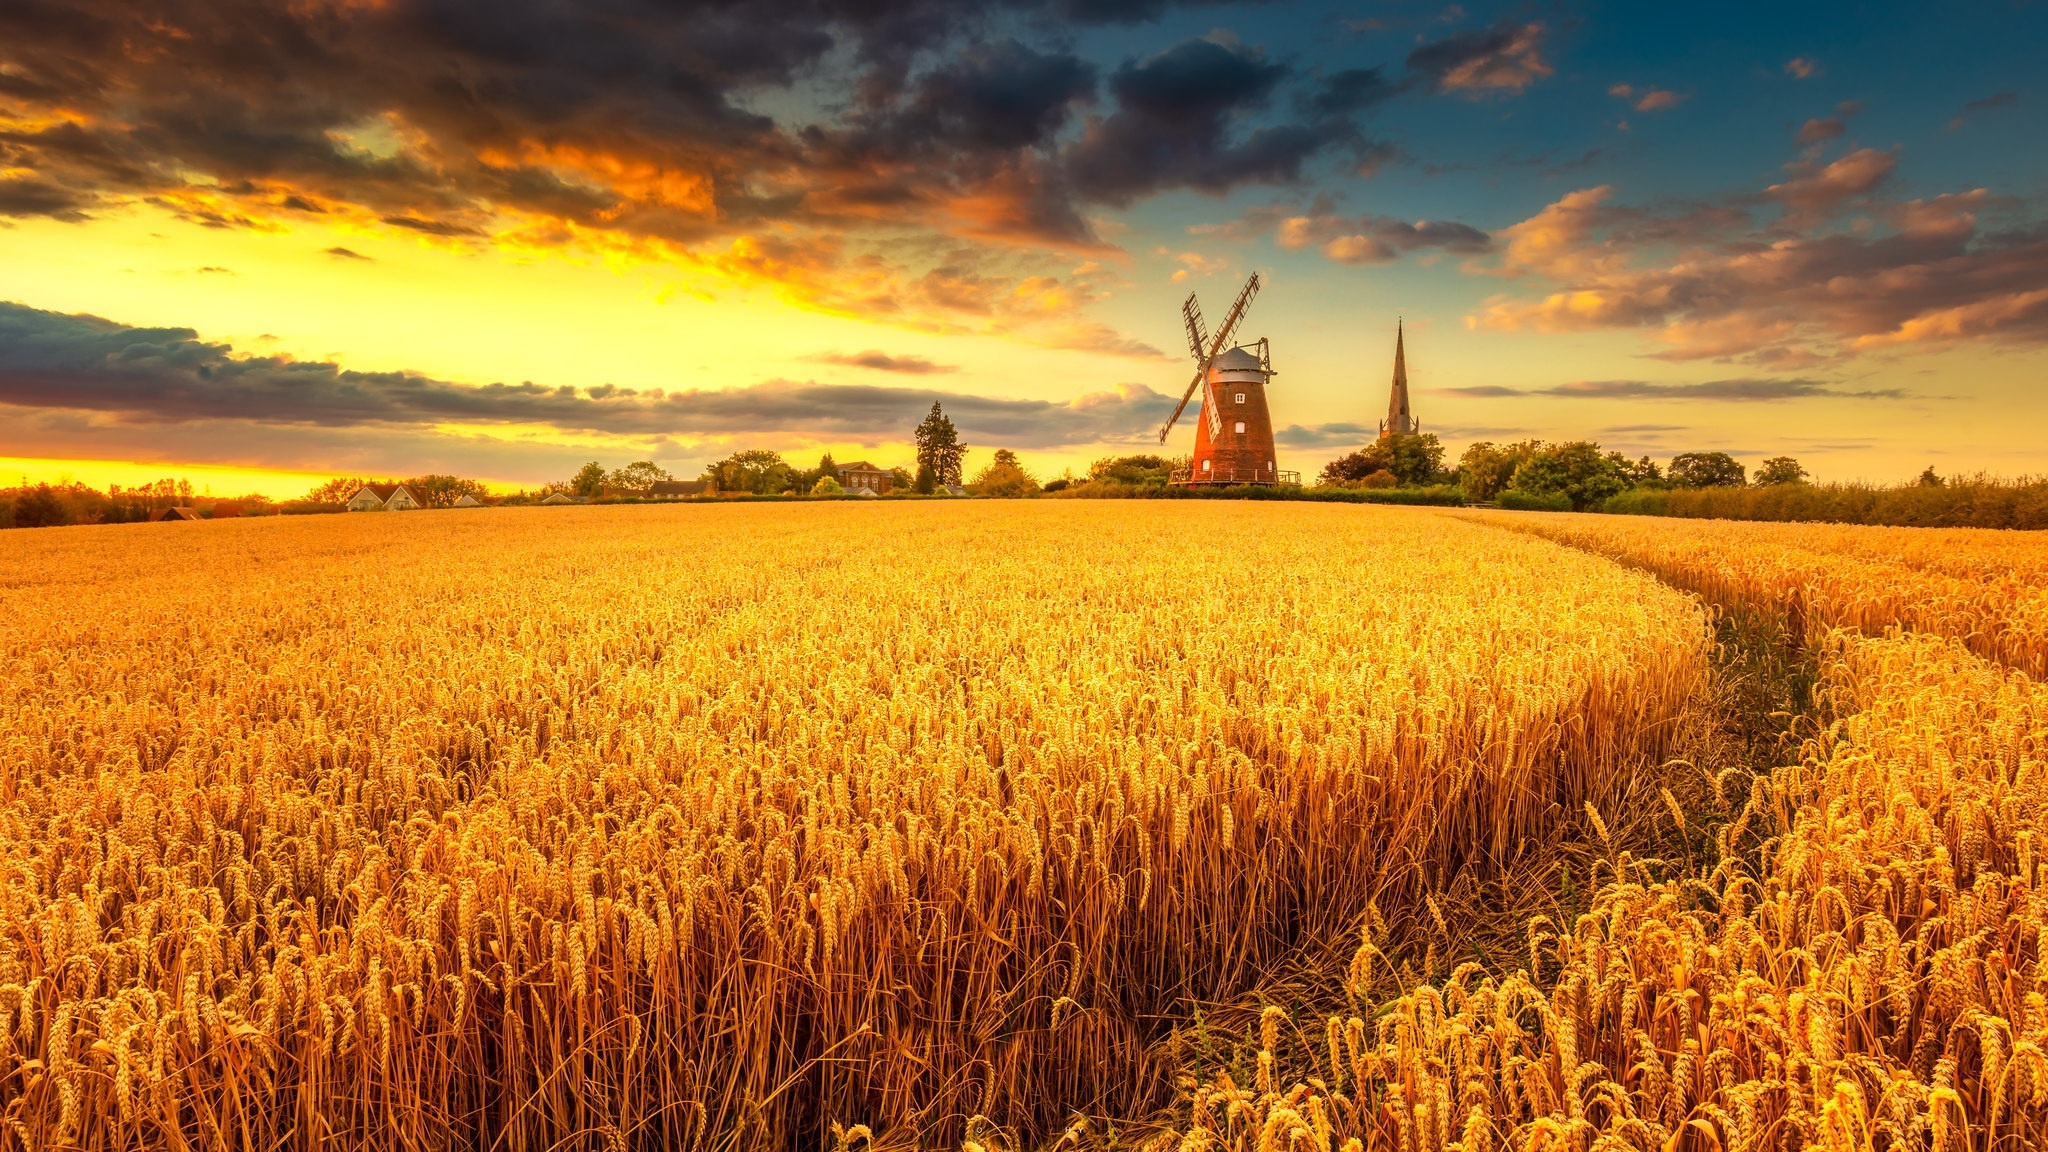 1680x1050 Windmill On Wheat Field At Sunset 1680x1050 Resolution Wallpaper Hd Nature 4k Wallpapers Images Photos And Background Wallpapers Den